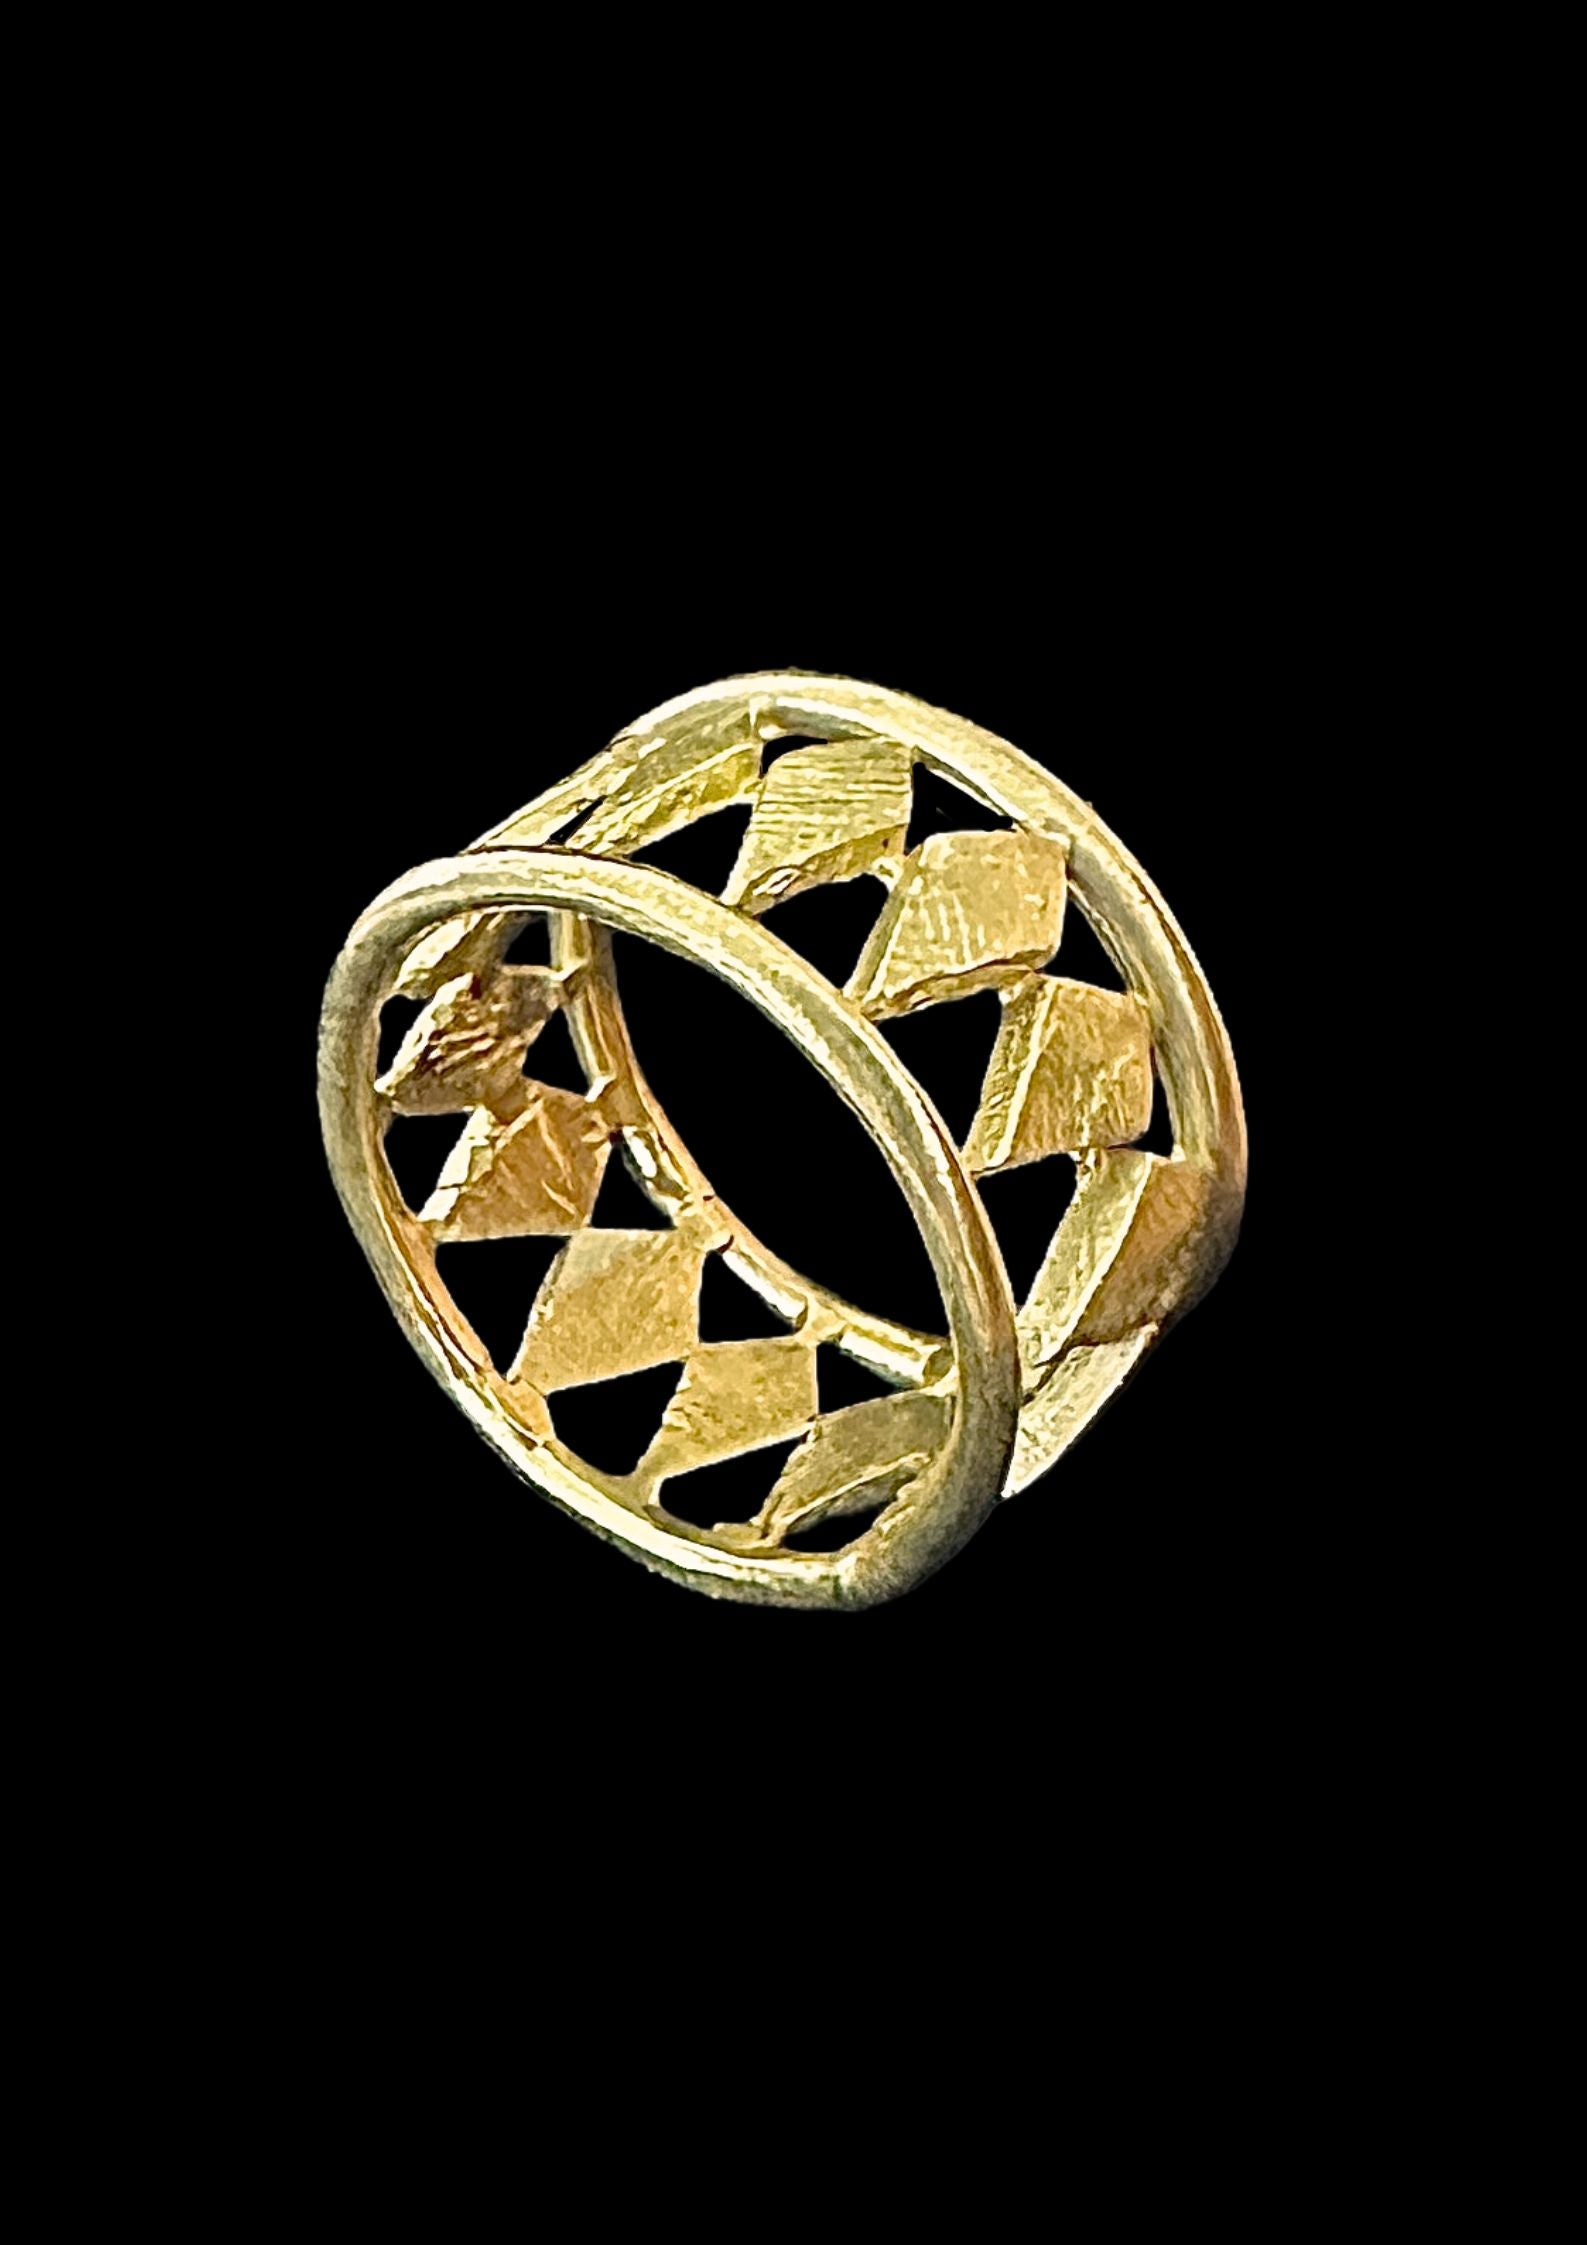 The Harlequin ring